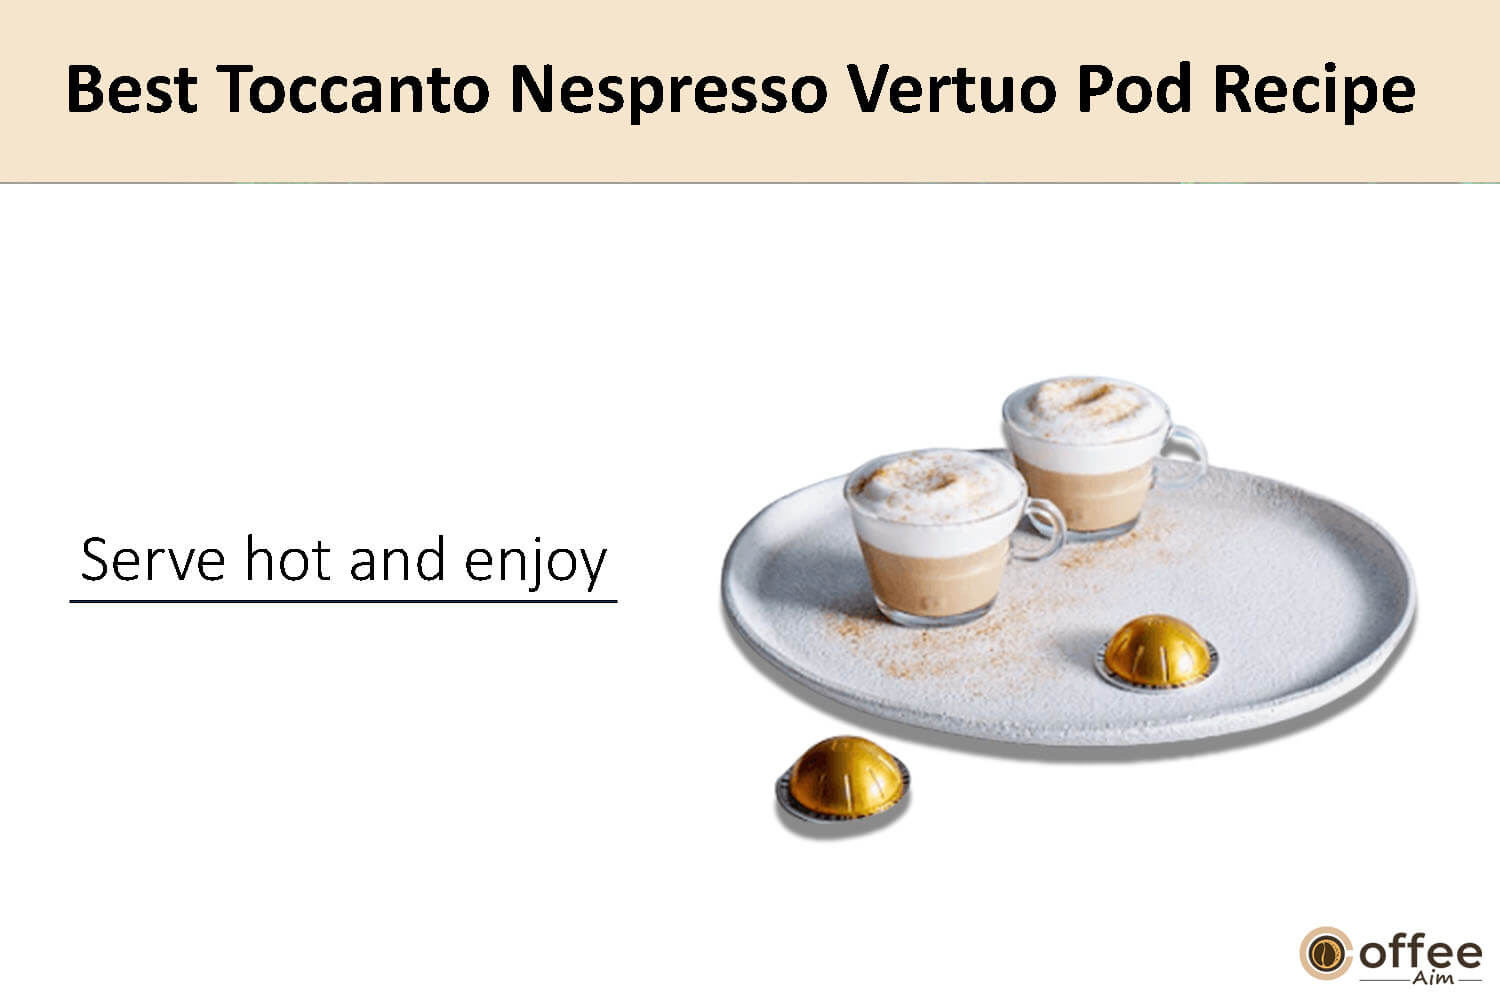 In this image, I clarify the preparation instructions for crafting the finest Toccanto Nespresso Vertuo coffee pod.